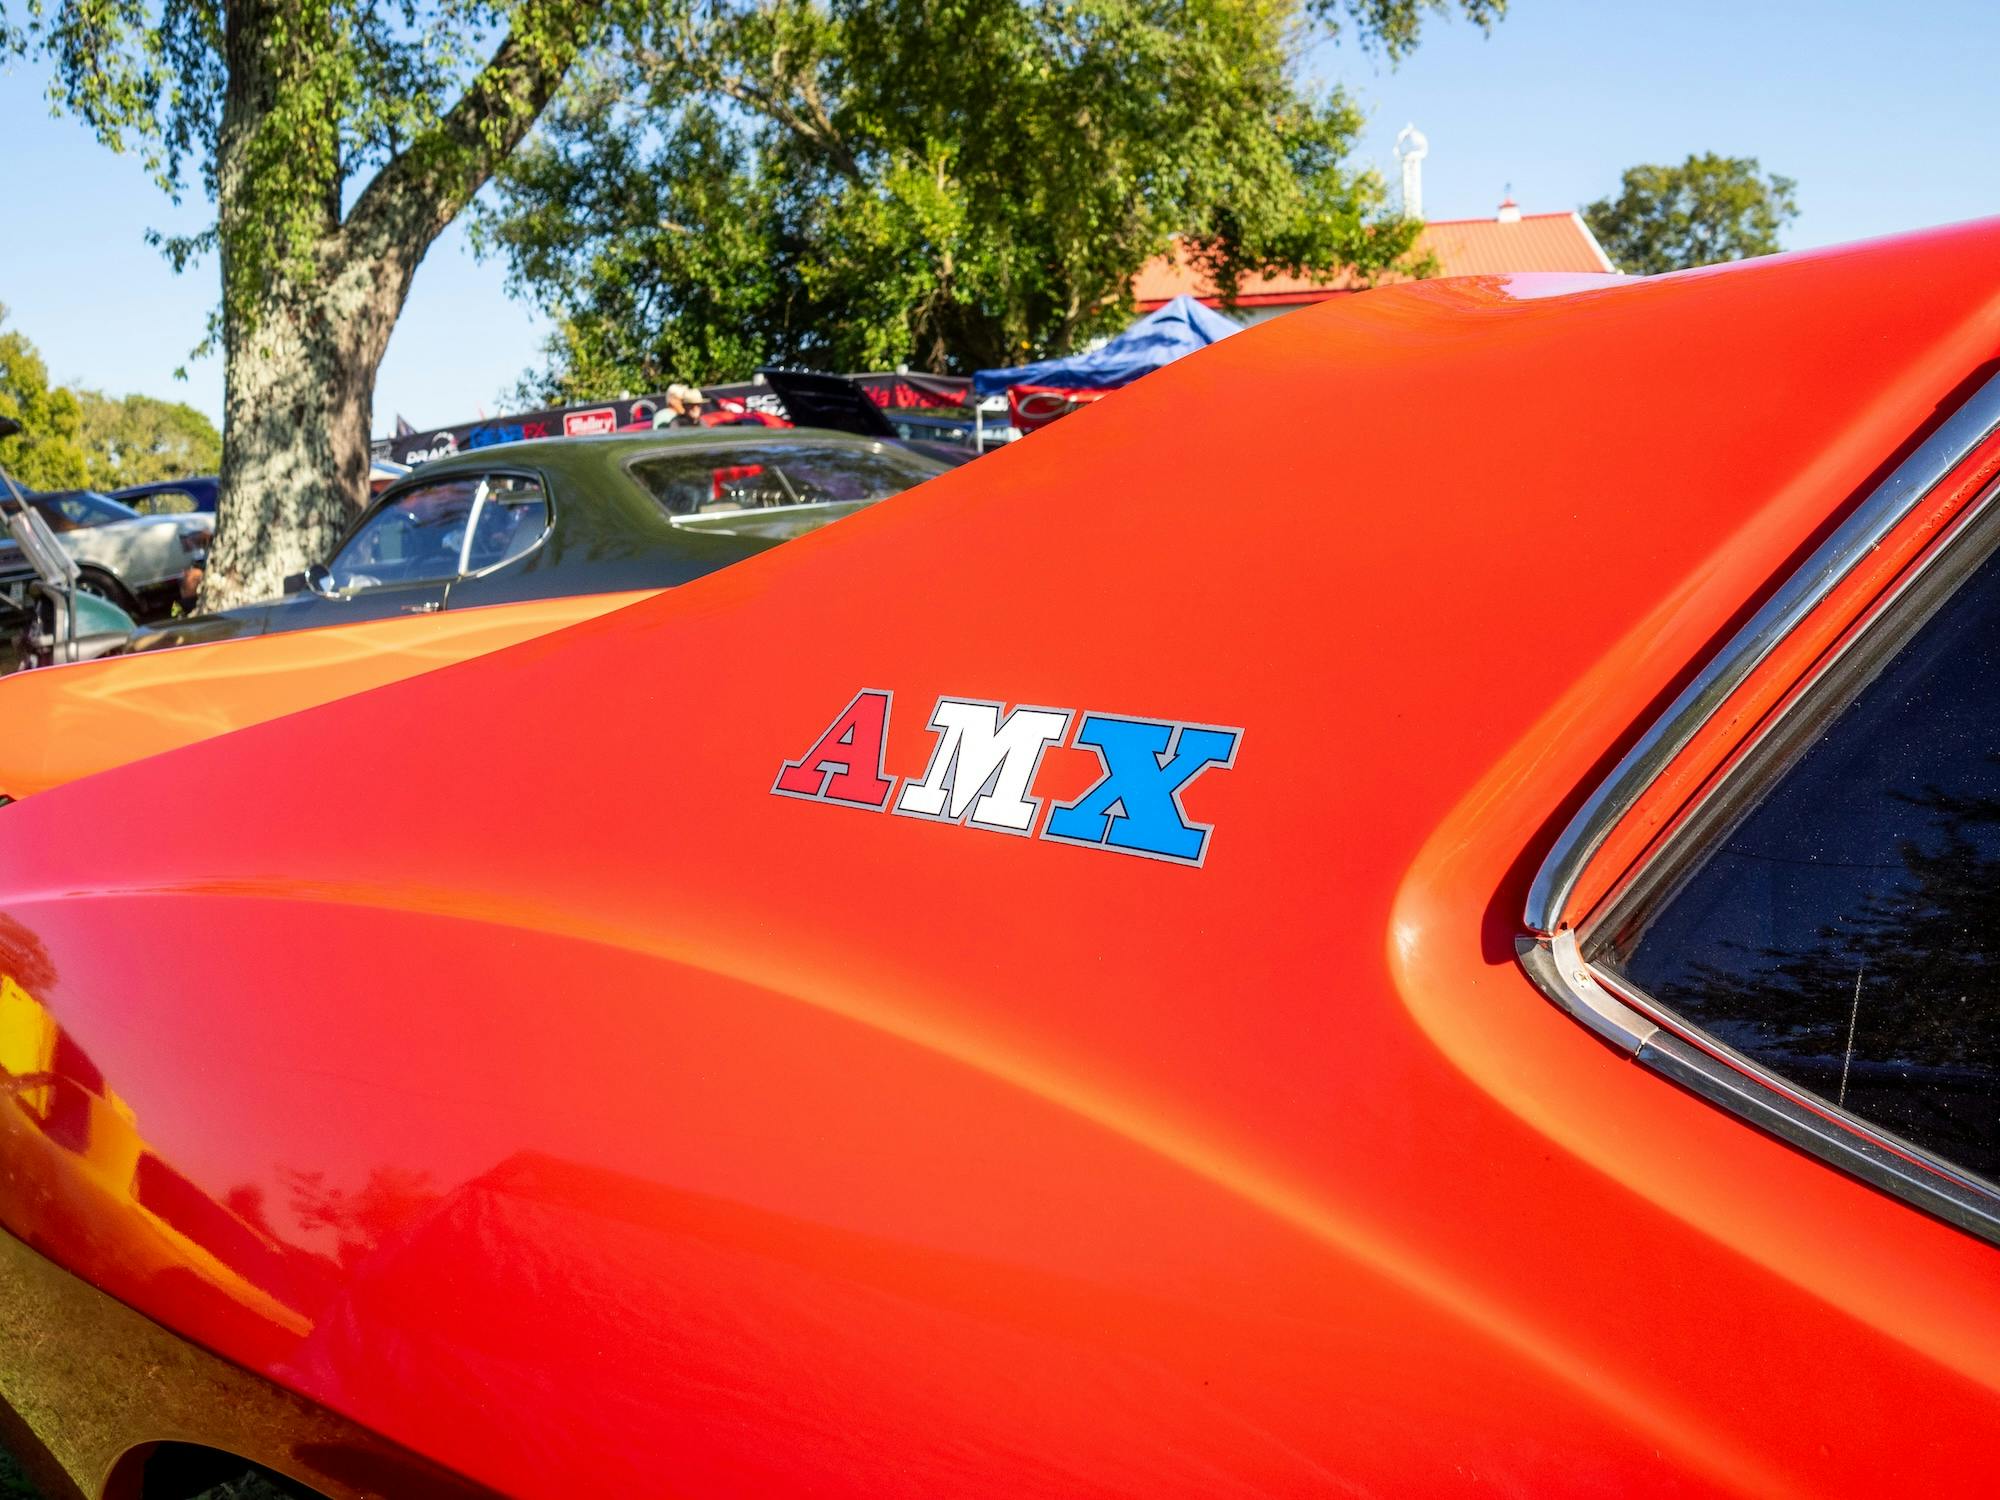 2023 Holley MoParty event amx